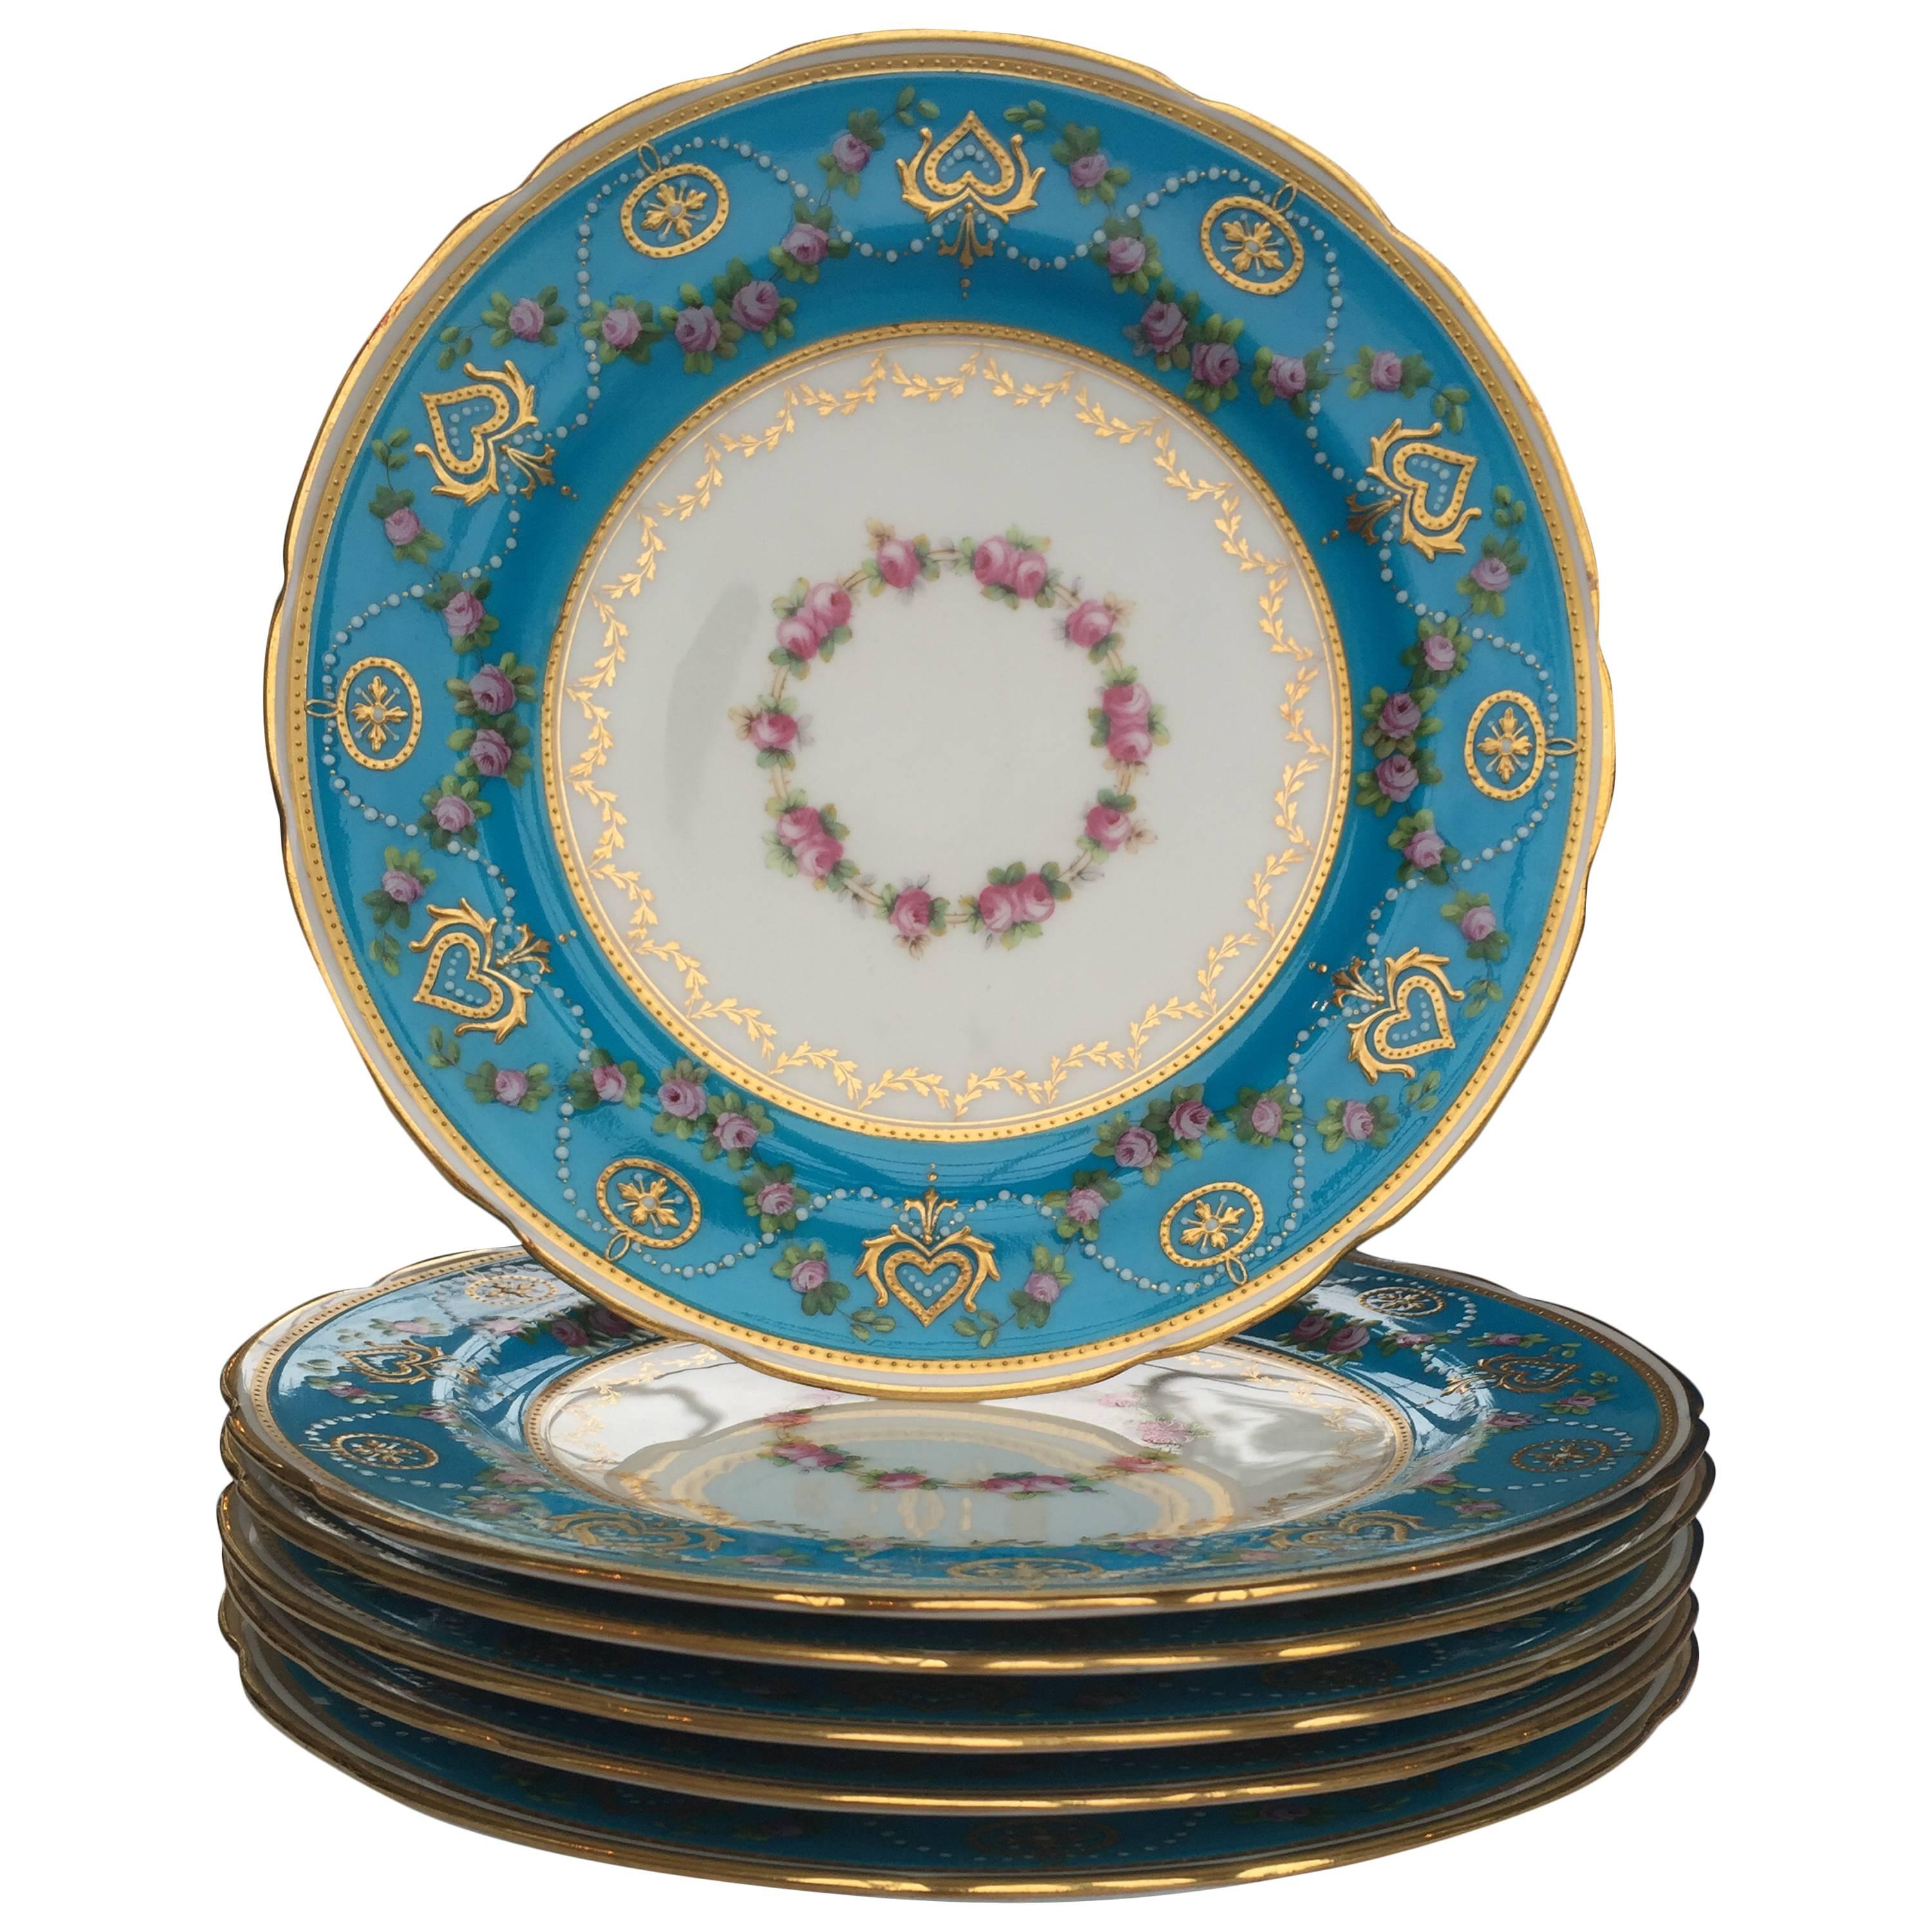 A very elegant set of Ten celeste blue bone China desert plates by Minton, fit for a Queen.
The brilliant translucent celeste blue enamel border is painted with a pearl Meander and pink rosebud swags. In the center of the Plate is a wreath of roses